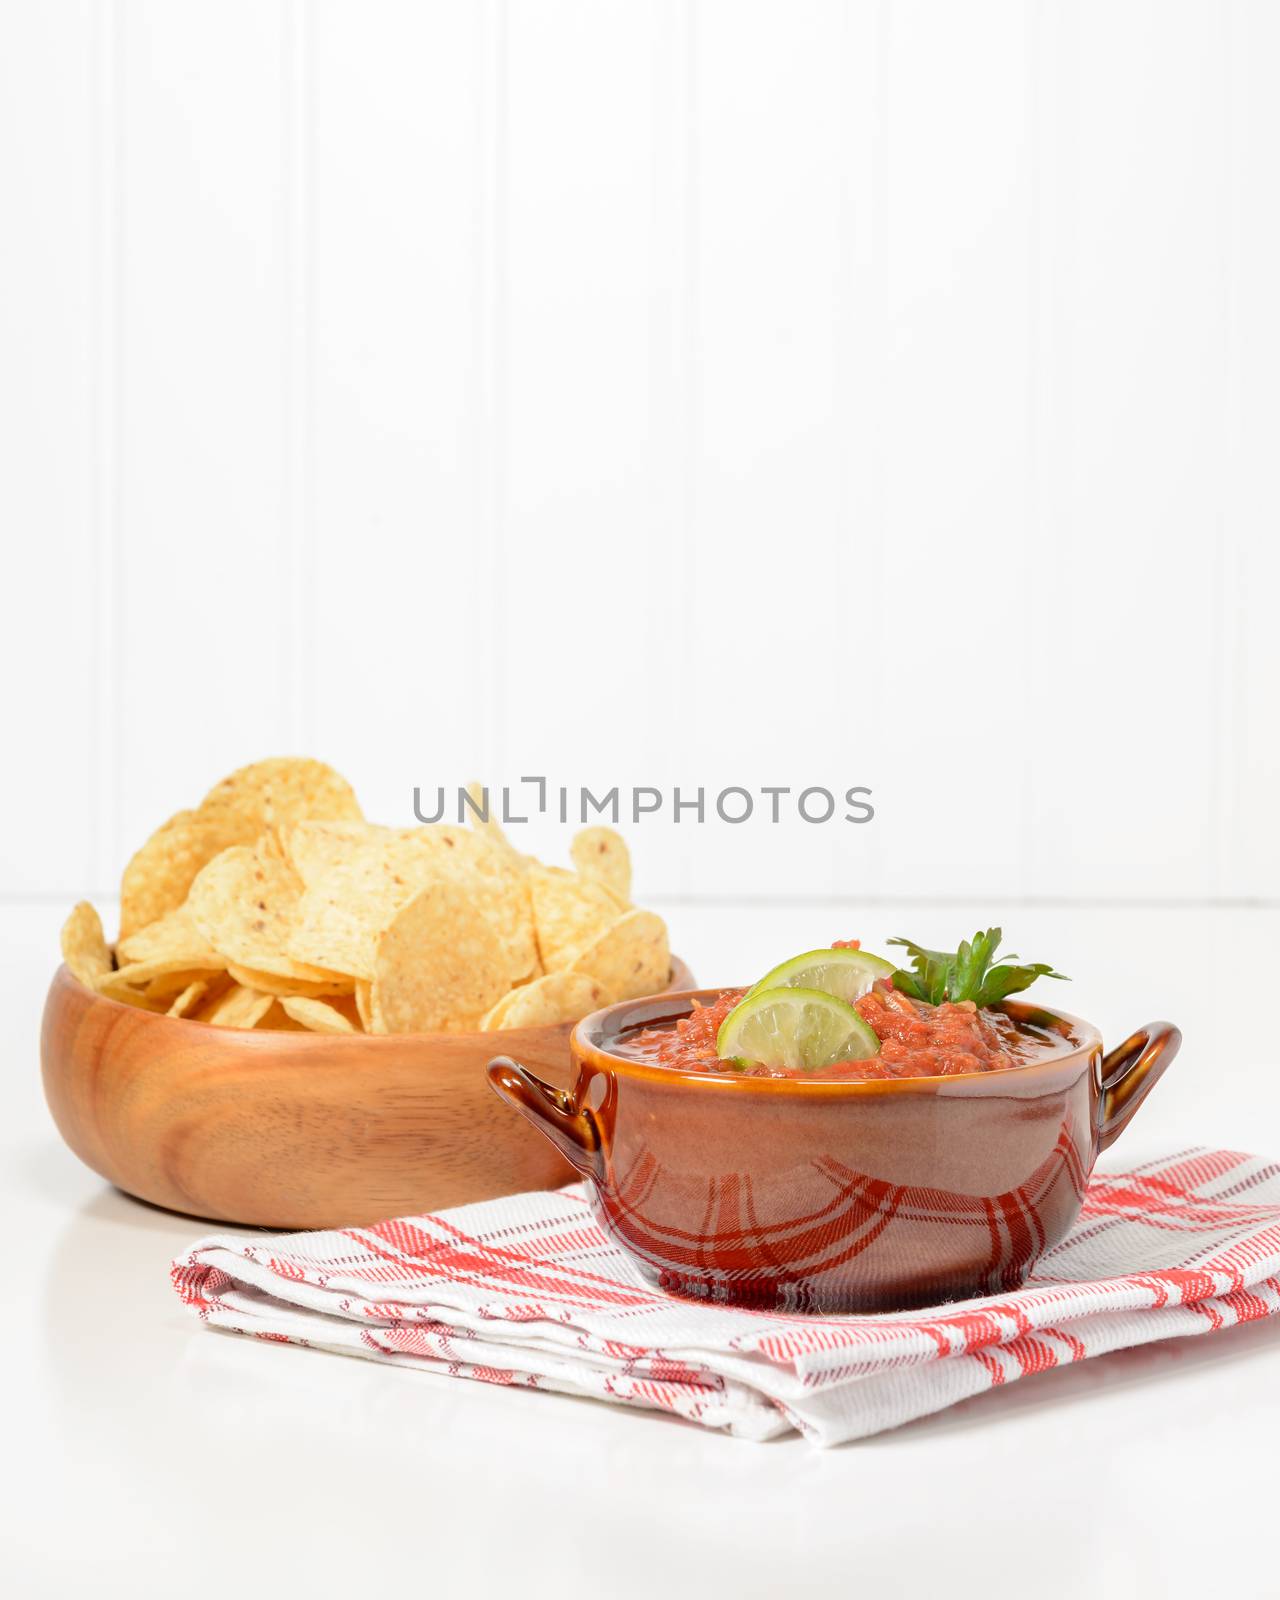 Salsa and Tortilla Chips Portrait by billberryphotography